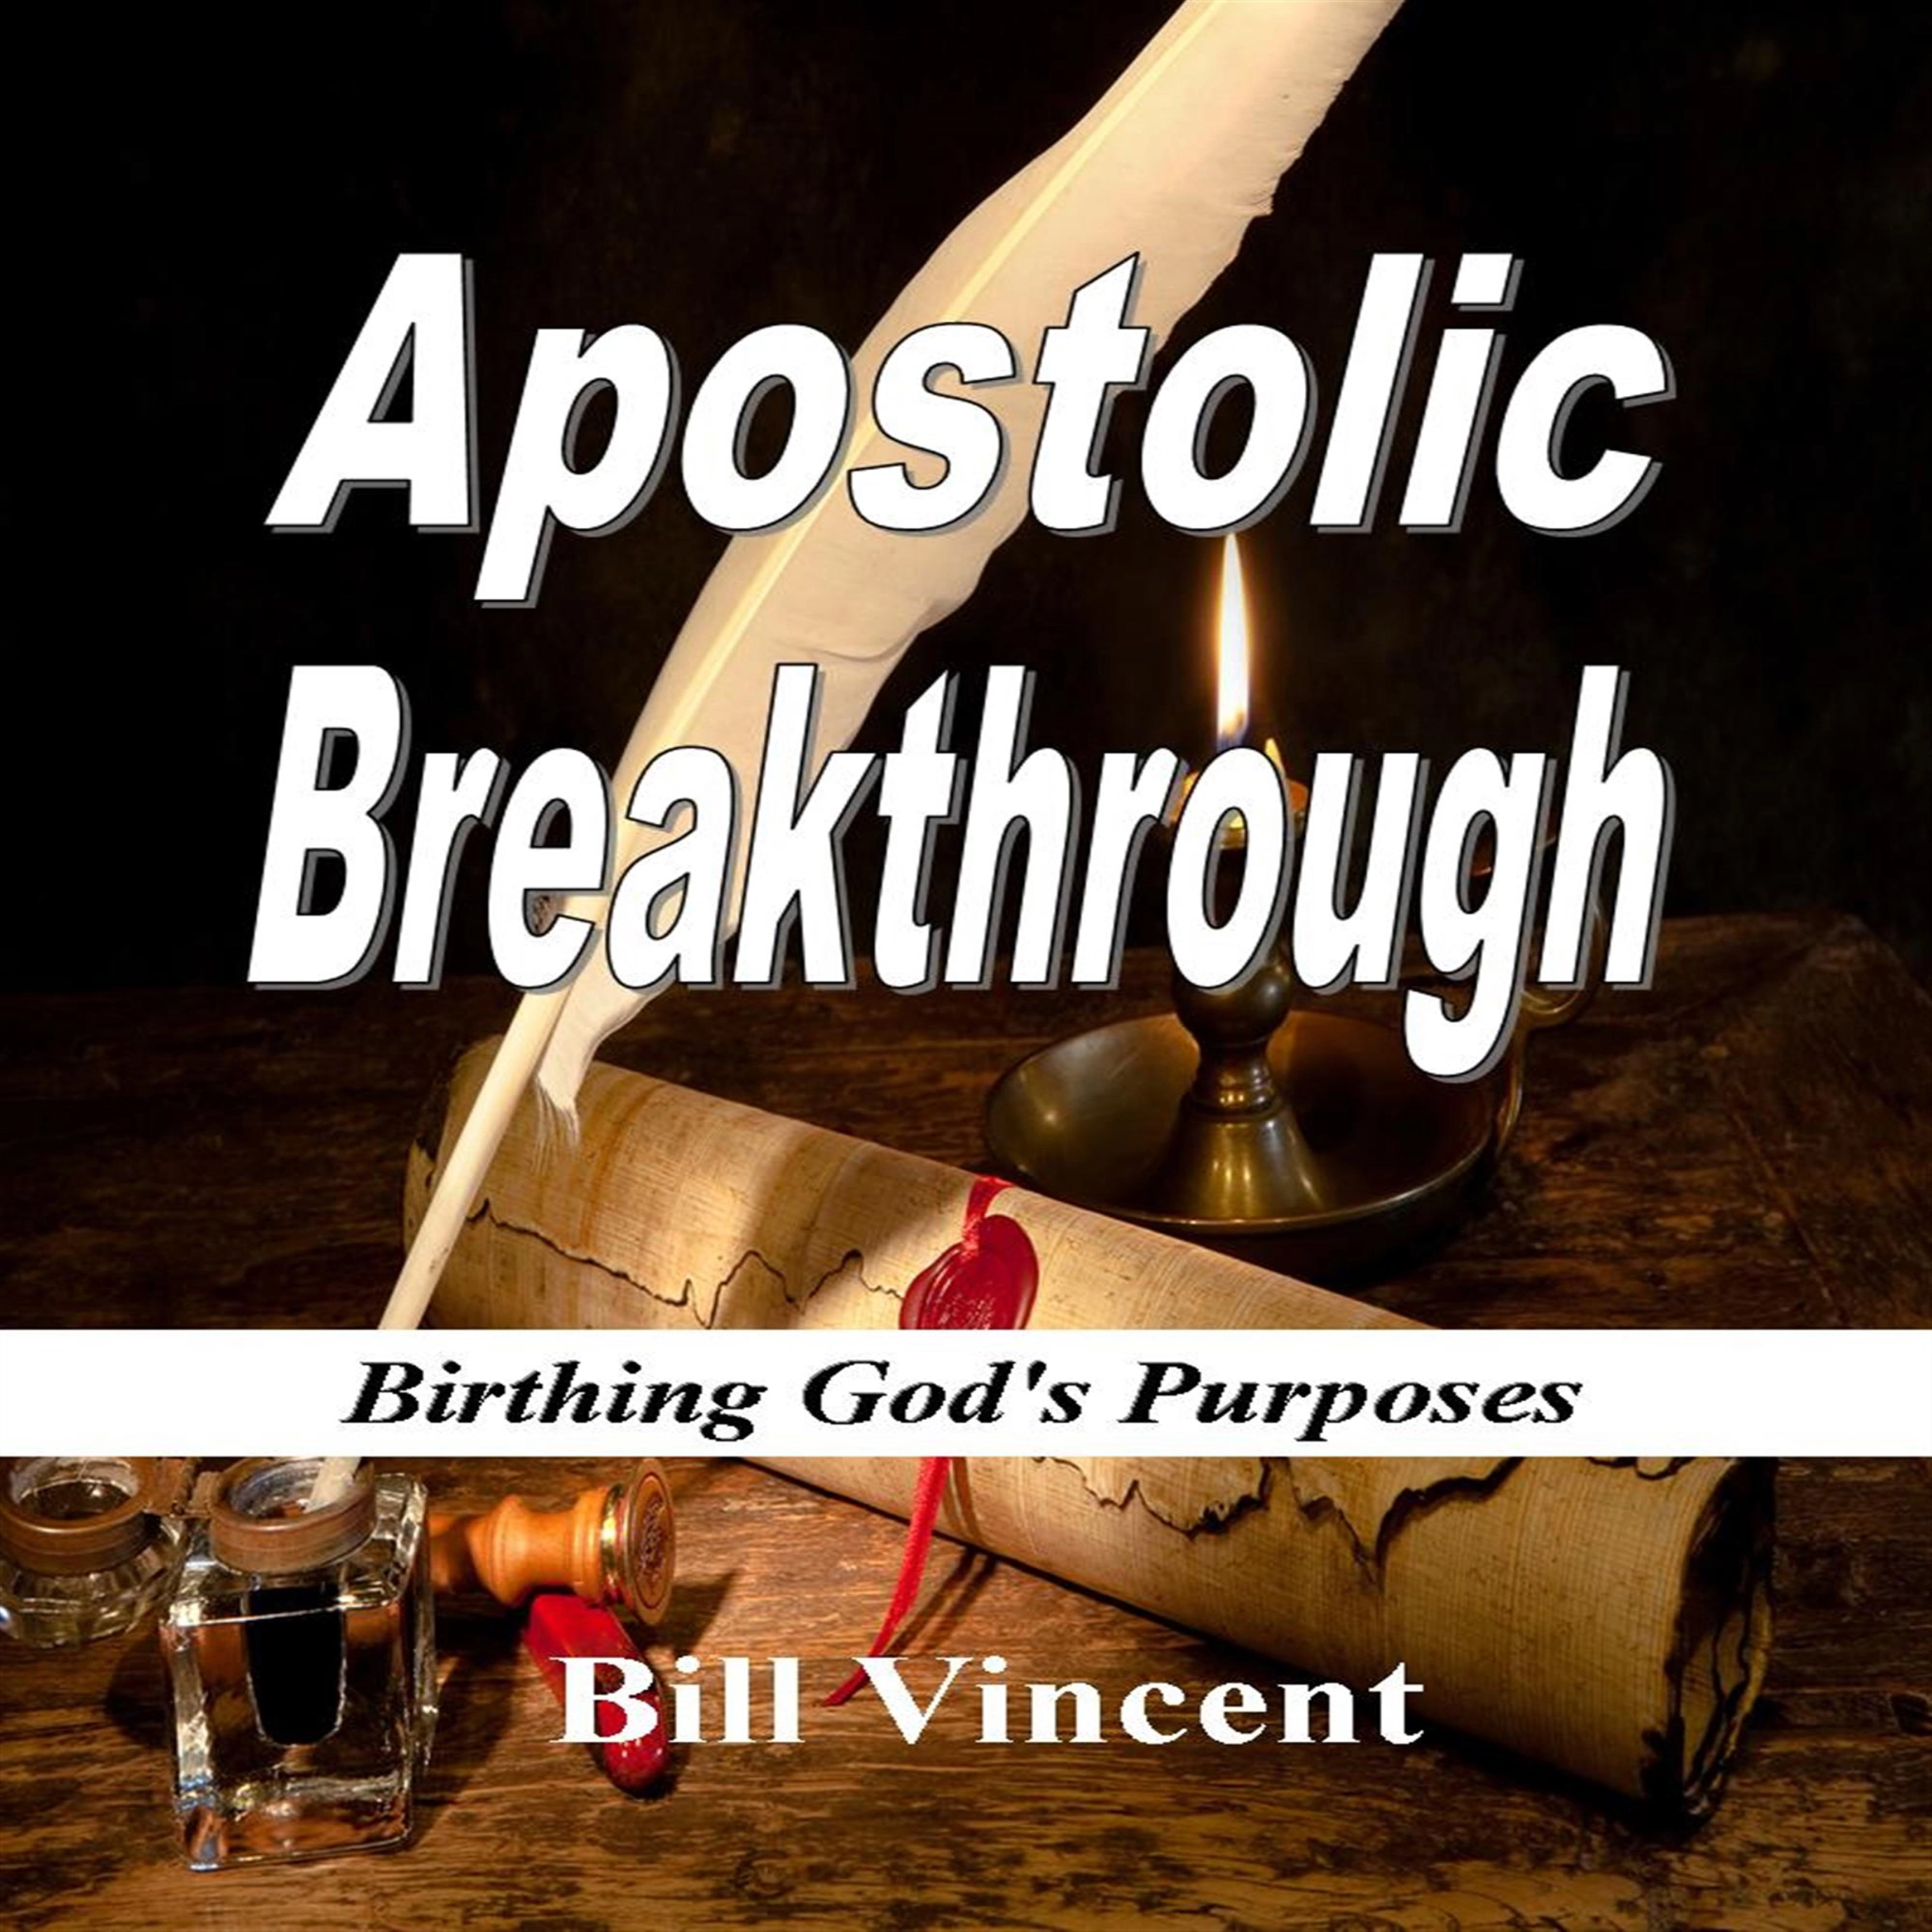 Apostolic Breakthrough Audiobook by Bill Vincent